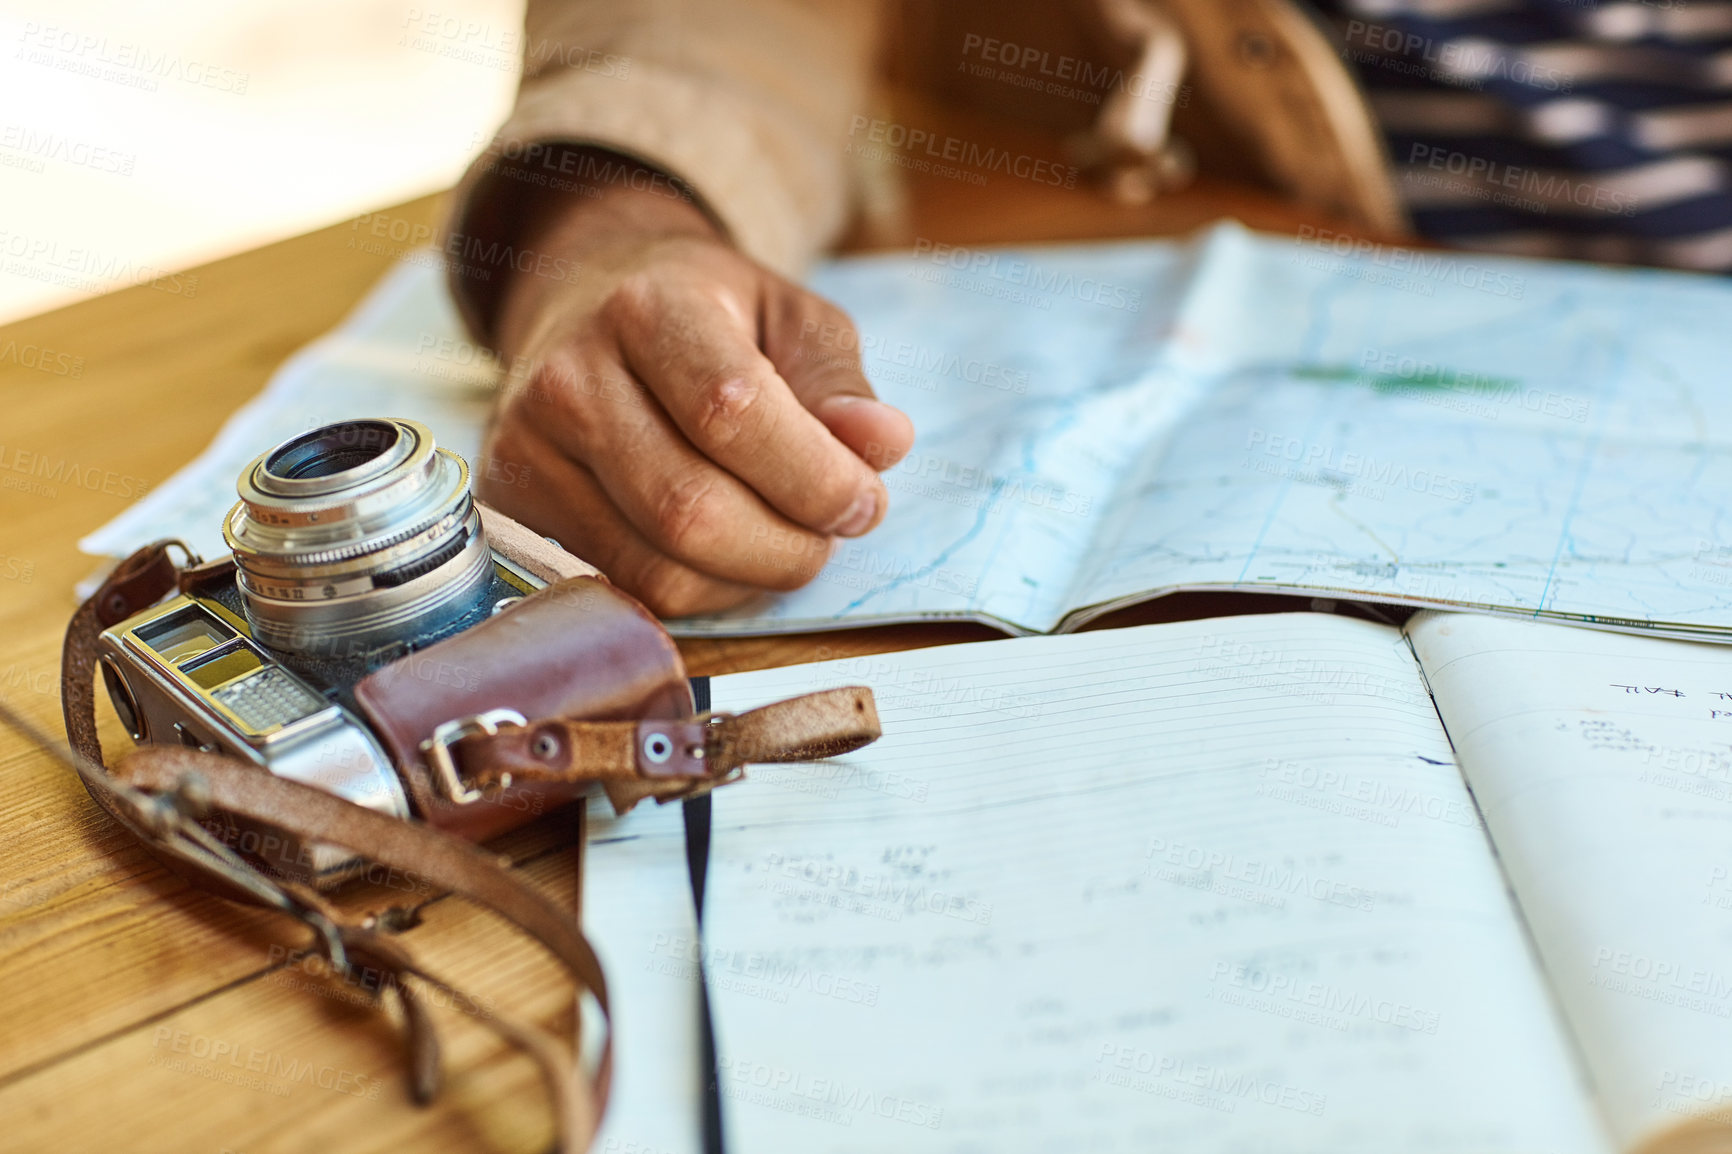 Buy stock photo Shot of an unidentifiable tourist looking at maps and travel journals while sitting a a small table